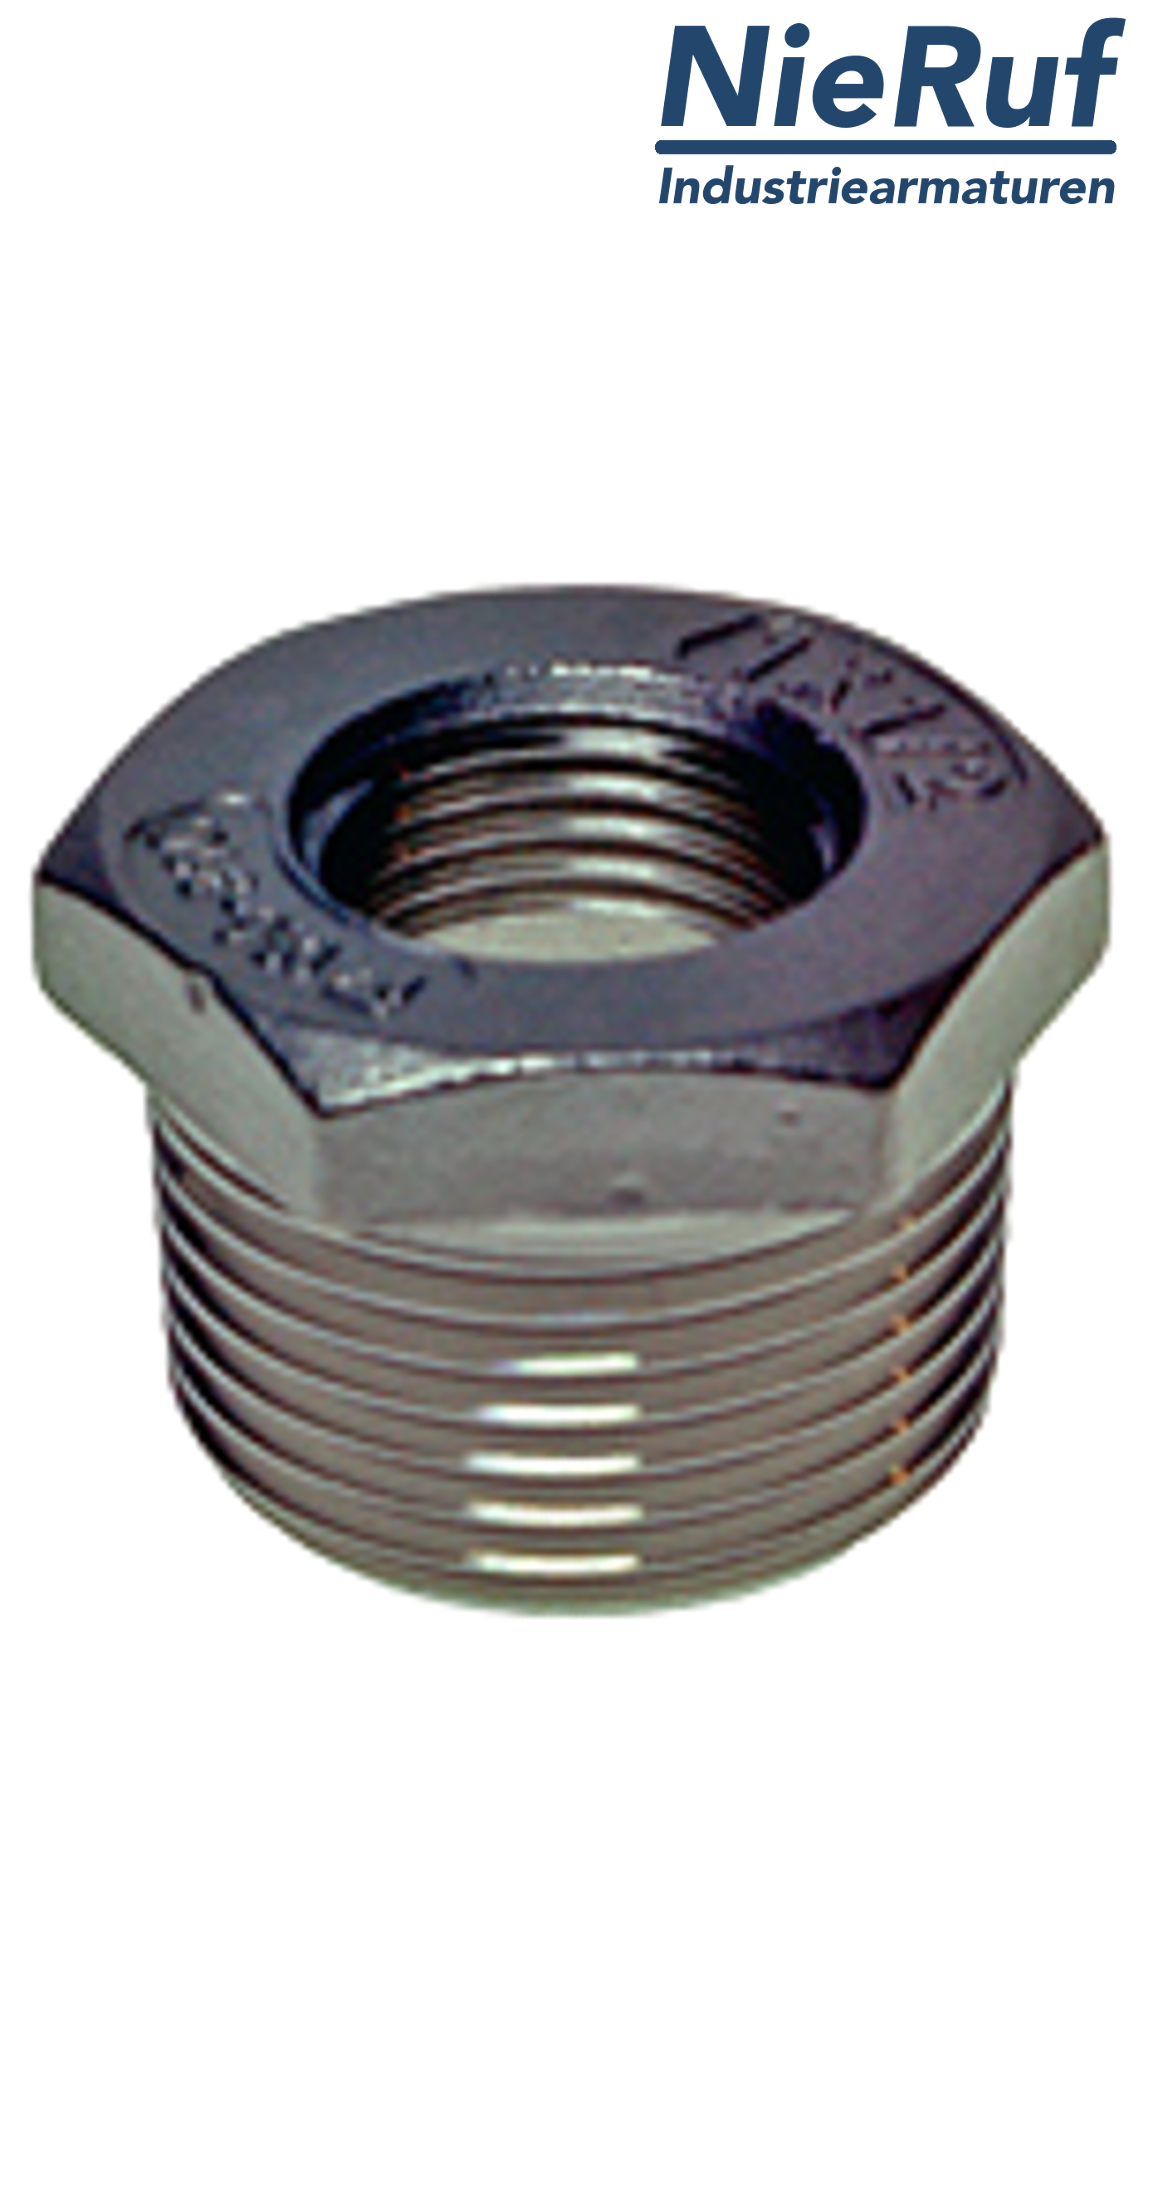 reducing bush 1 1/2" x 1" inch NPT male X female stainless steel 316L